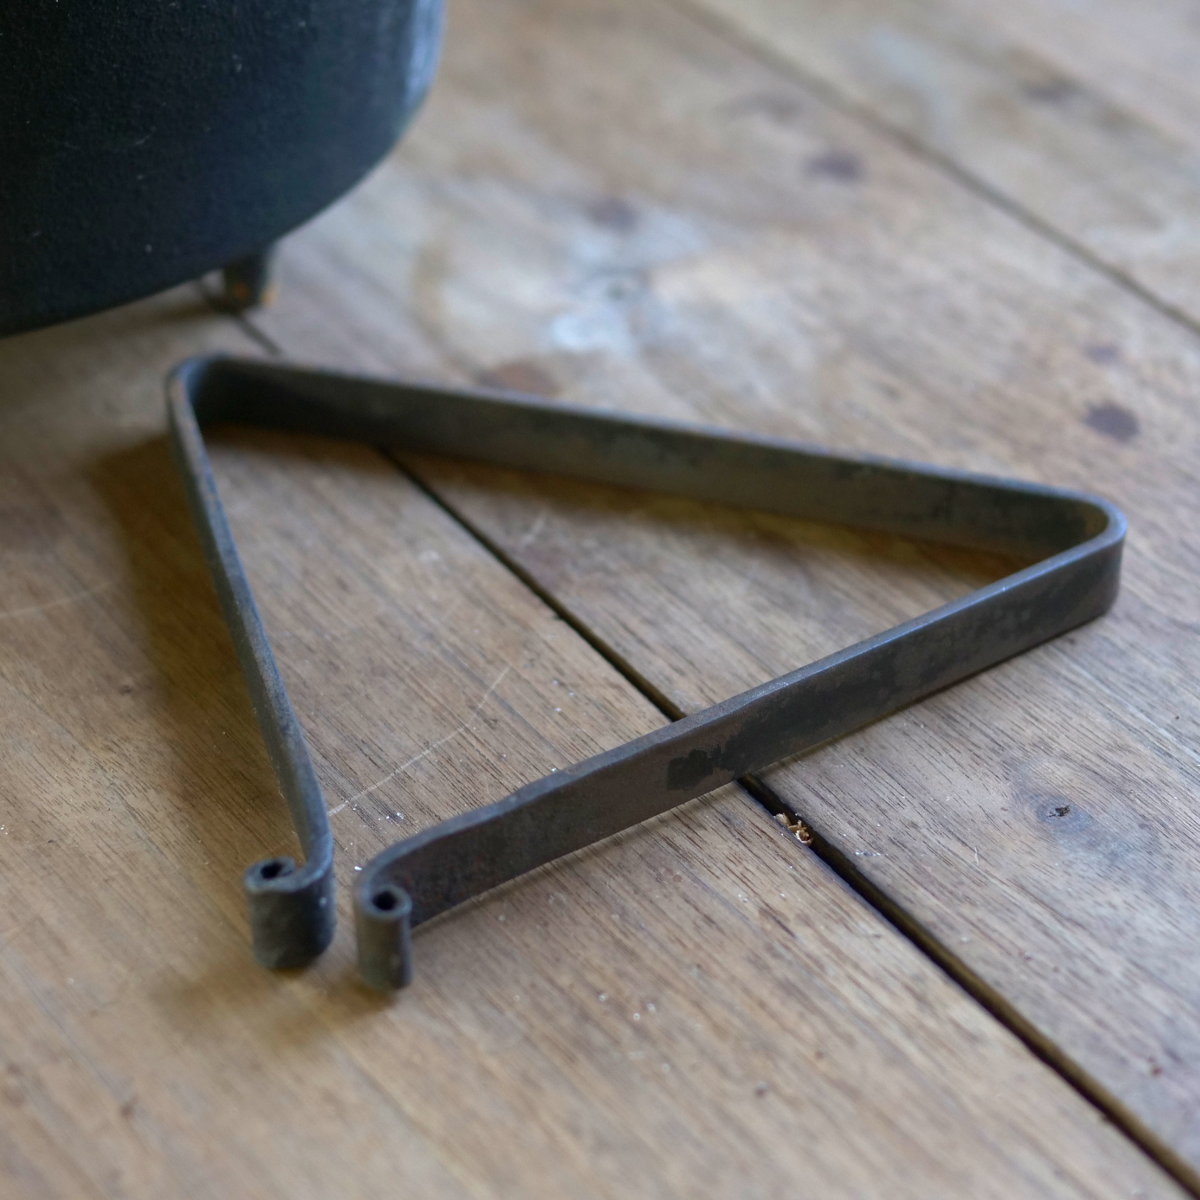 Dutch oven trivet with two sets of legs